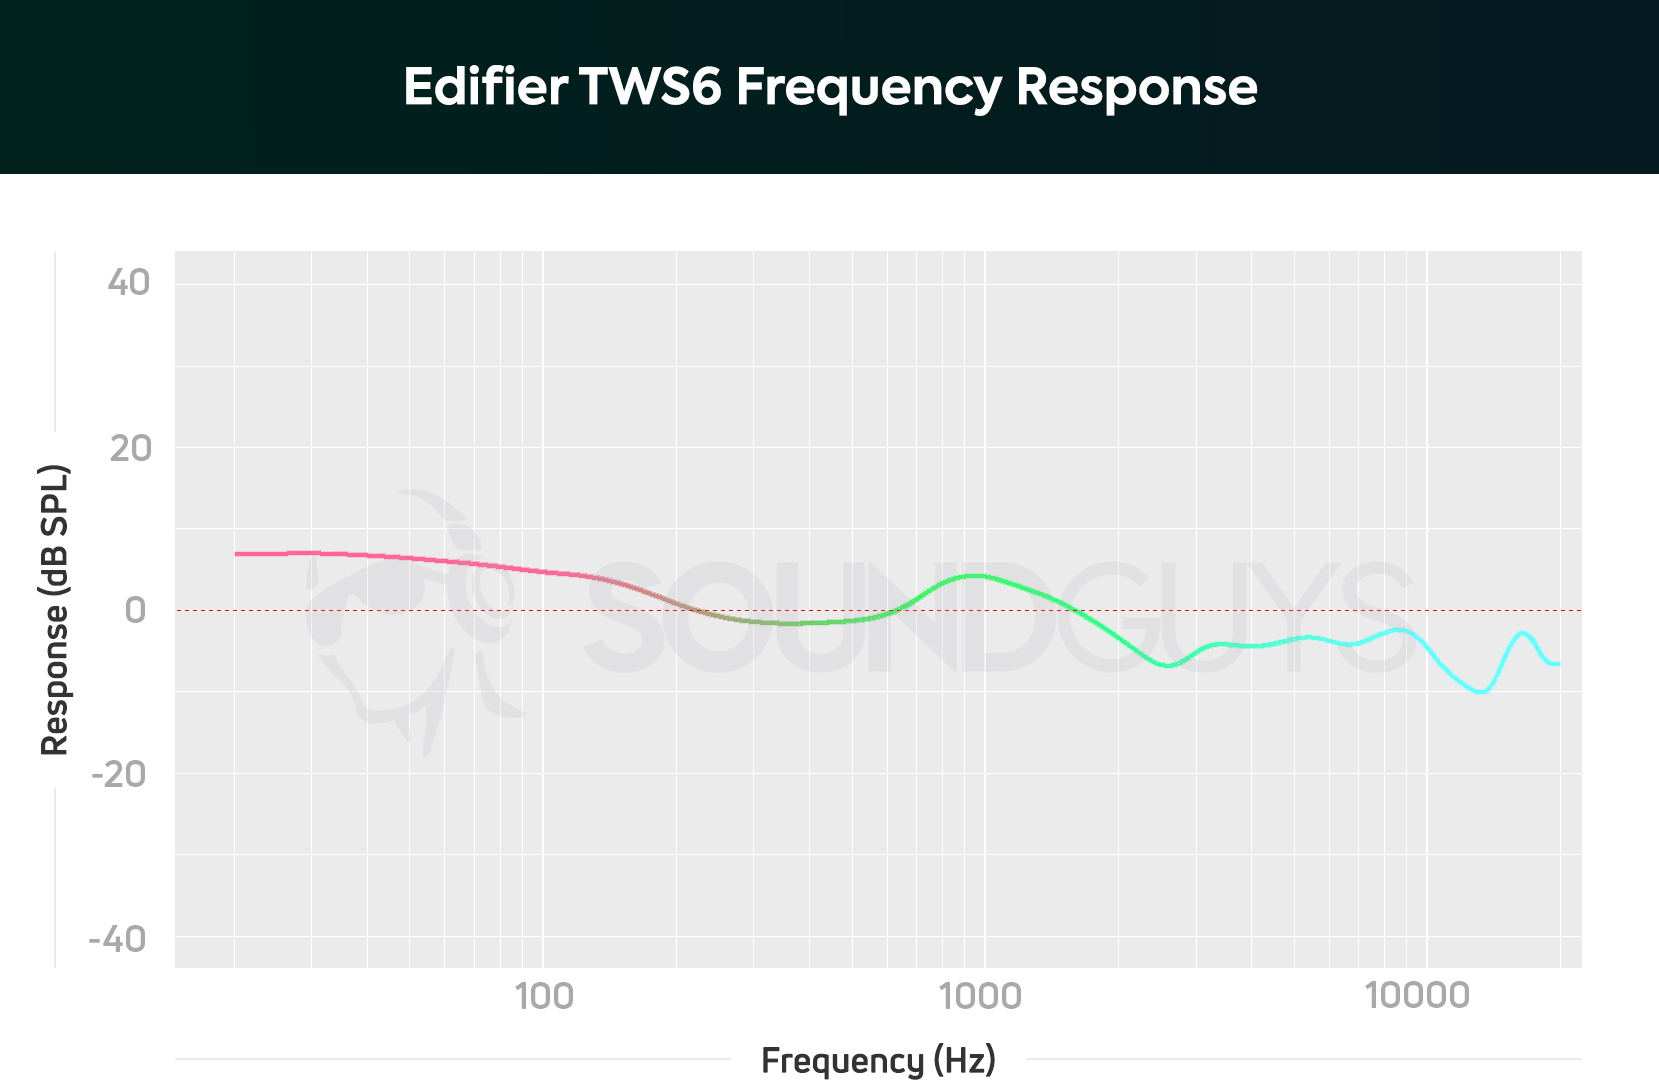 A chart depicts the Edifier TWS6 true wireless earbuds' frequency response, which amplifies bass frequencies and makes them sound 1.5-2 times louder than mids.